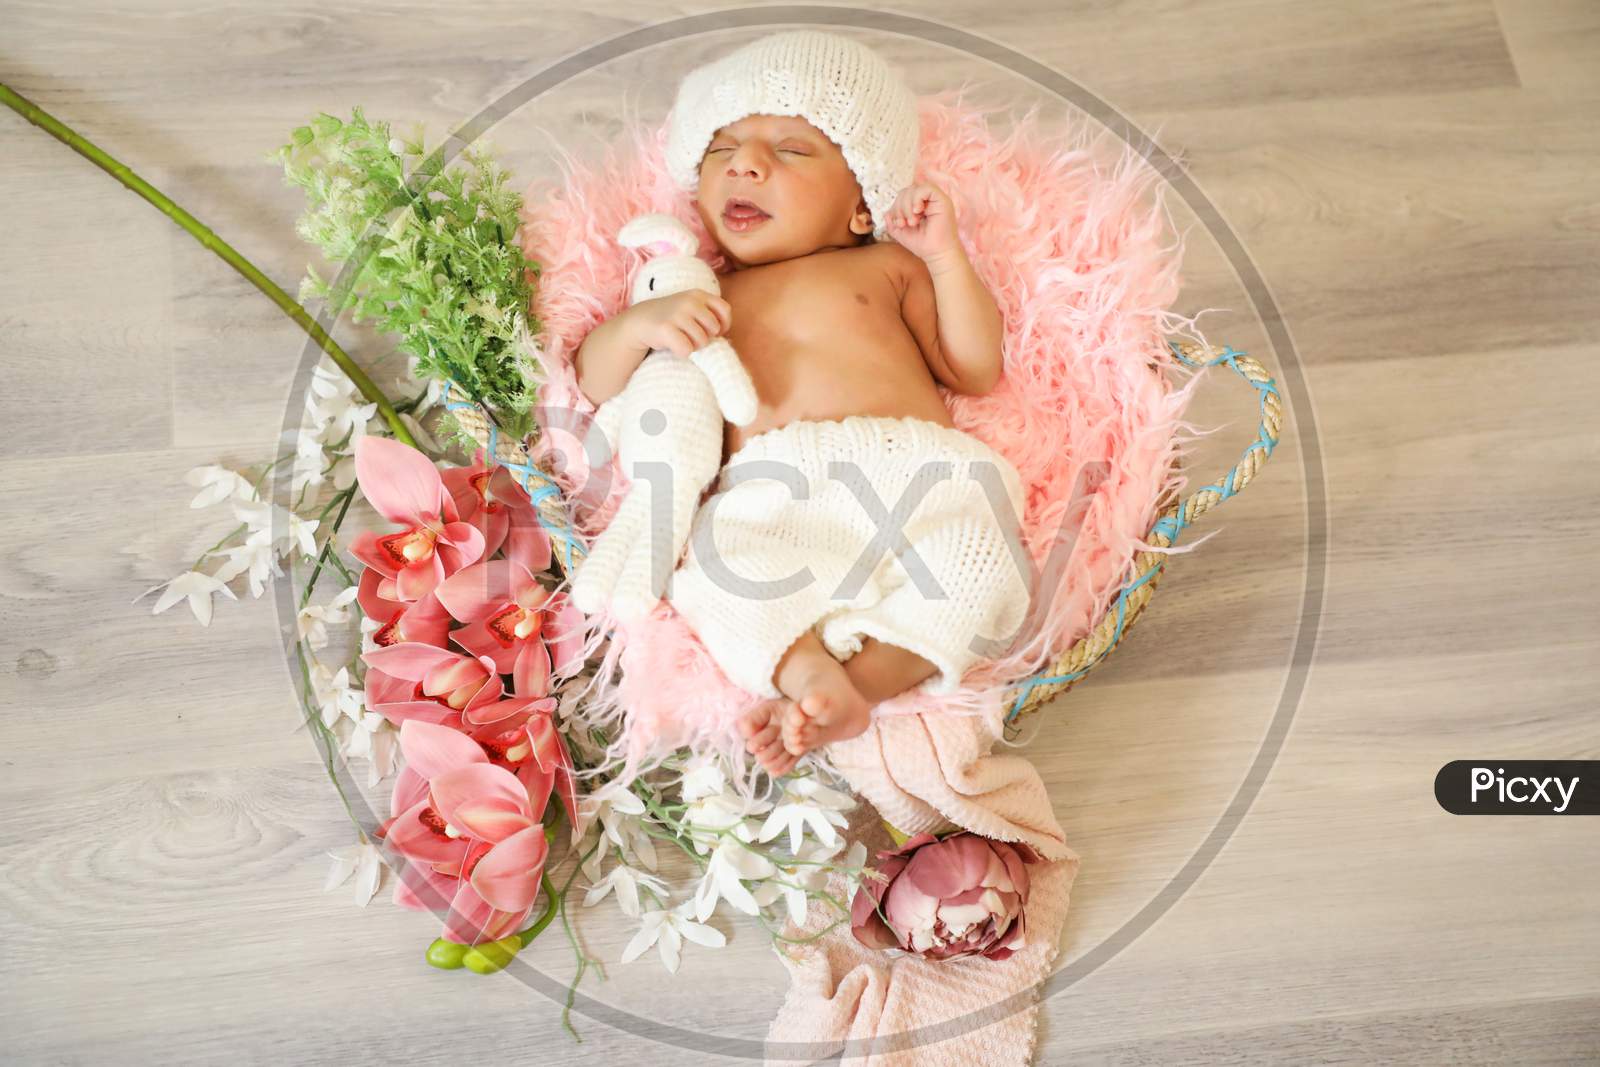 Newborn Cute Baby Girl Sleeping On Soft Wool With Doll In Hand Flowers And Green Leaves